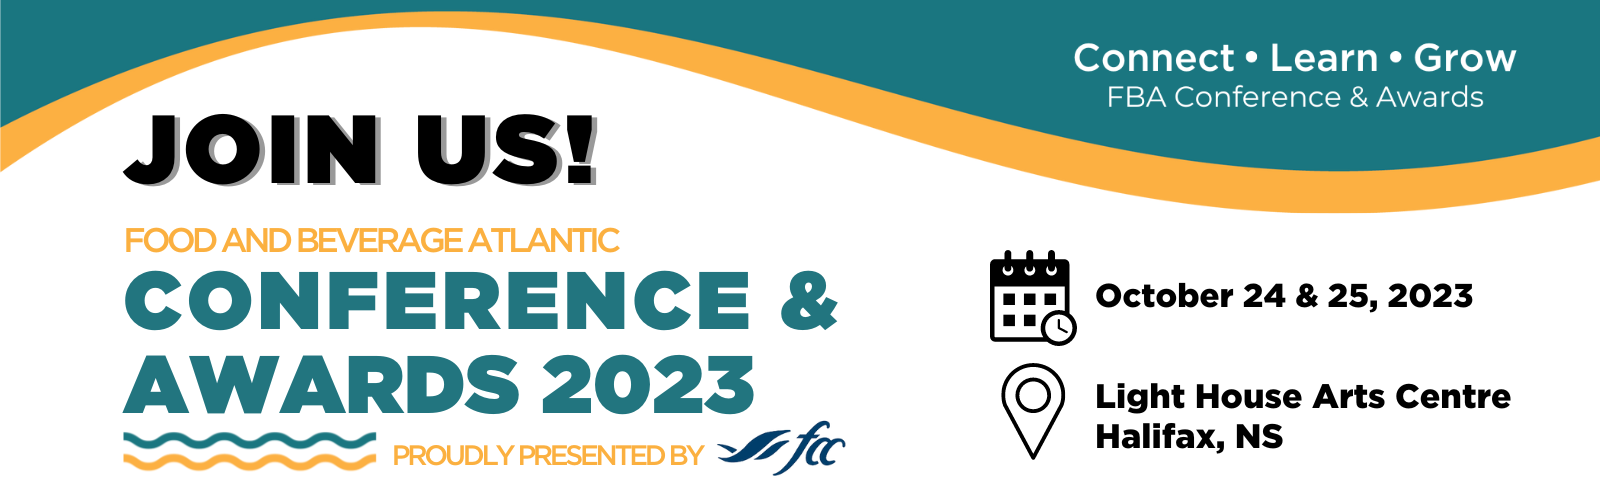 FBA Conference & Awards 2023 banner - Join us October 24th and 25th in Halifax